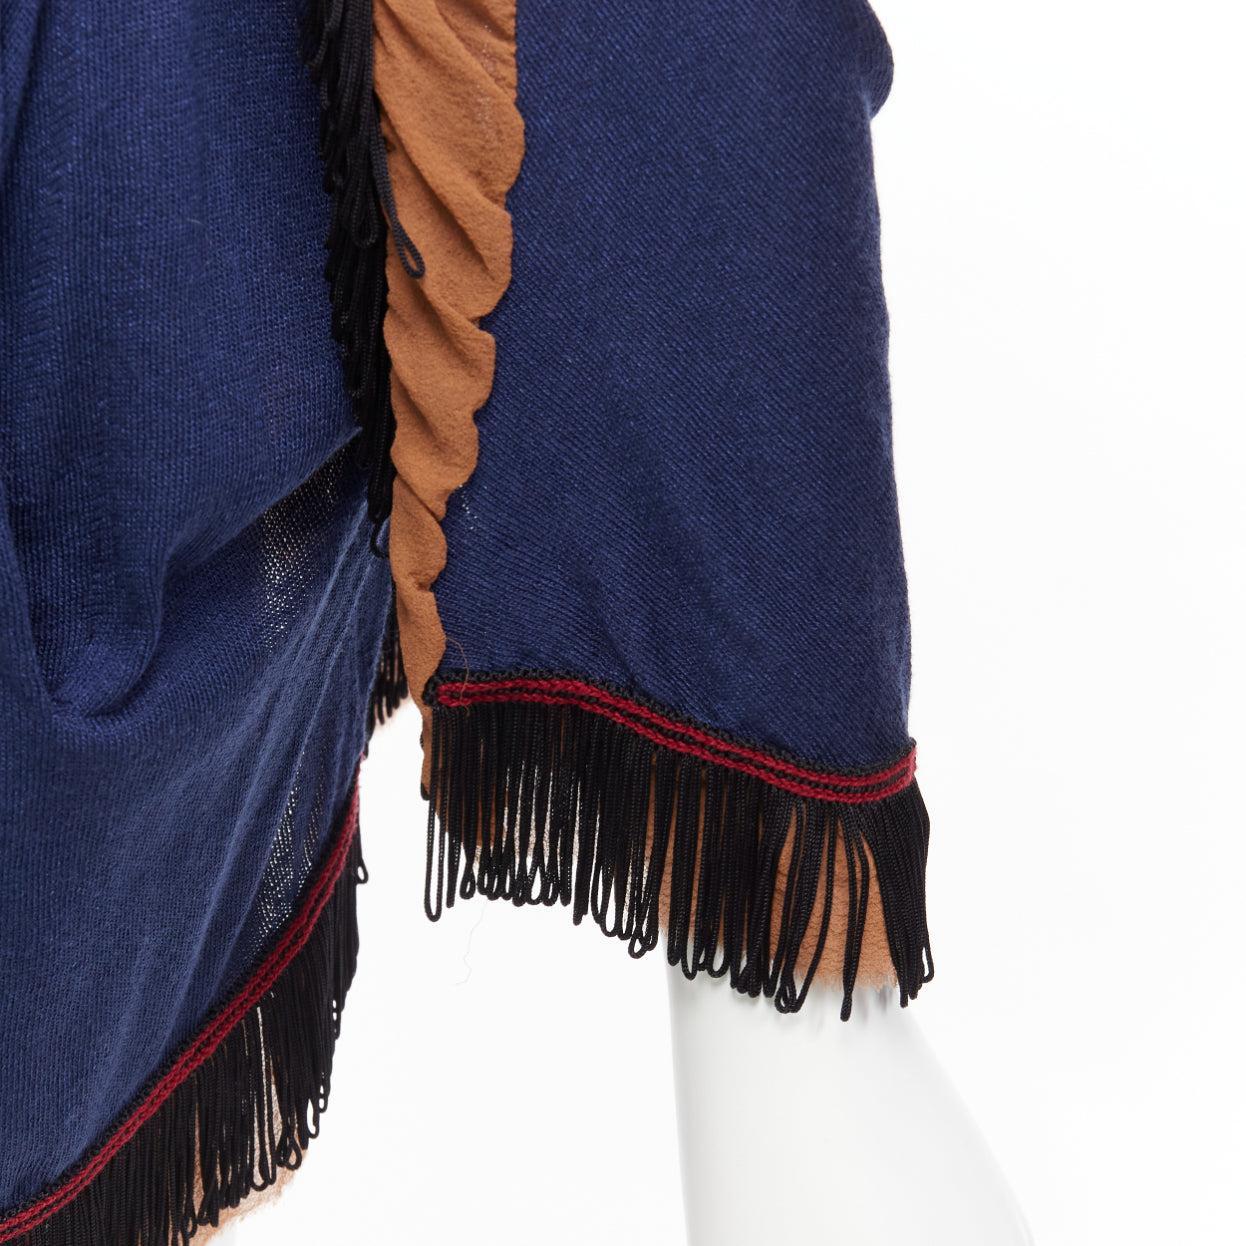 TOGA ARCHIVES navy brown black loop fringe ruffle sheer cardigan
Reference: NKLL/A00165
Brand: Toga Archives
Material: Feels like cotton
Color: Navy, Brown
Pattern: Solid
Closure: Hook & Bar

CONDITION:
Condition: Very good, this item was pre-owned